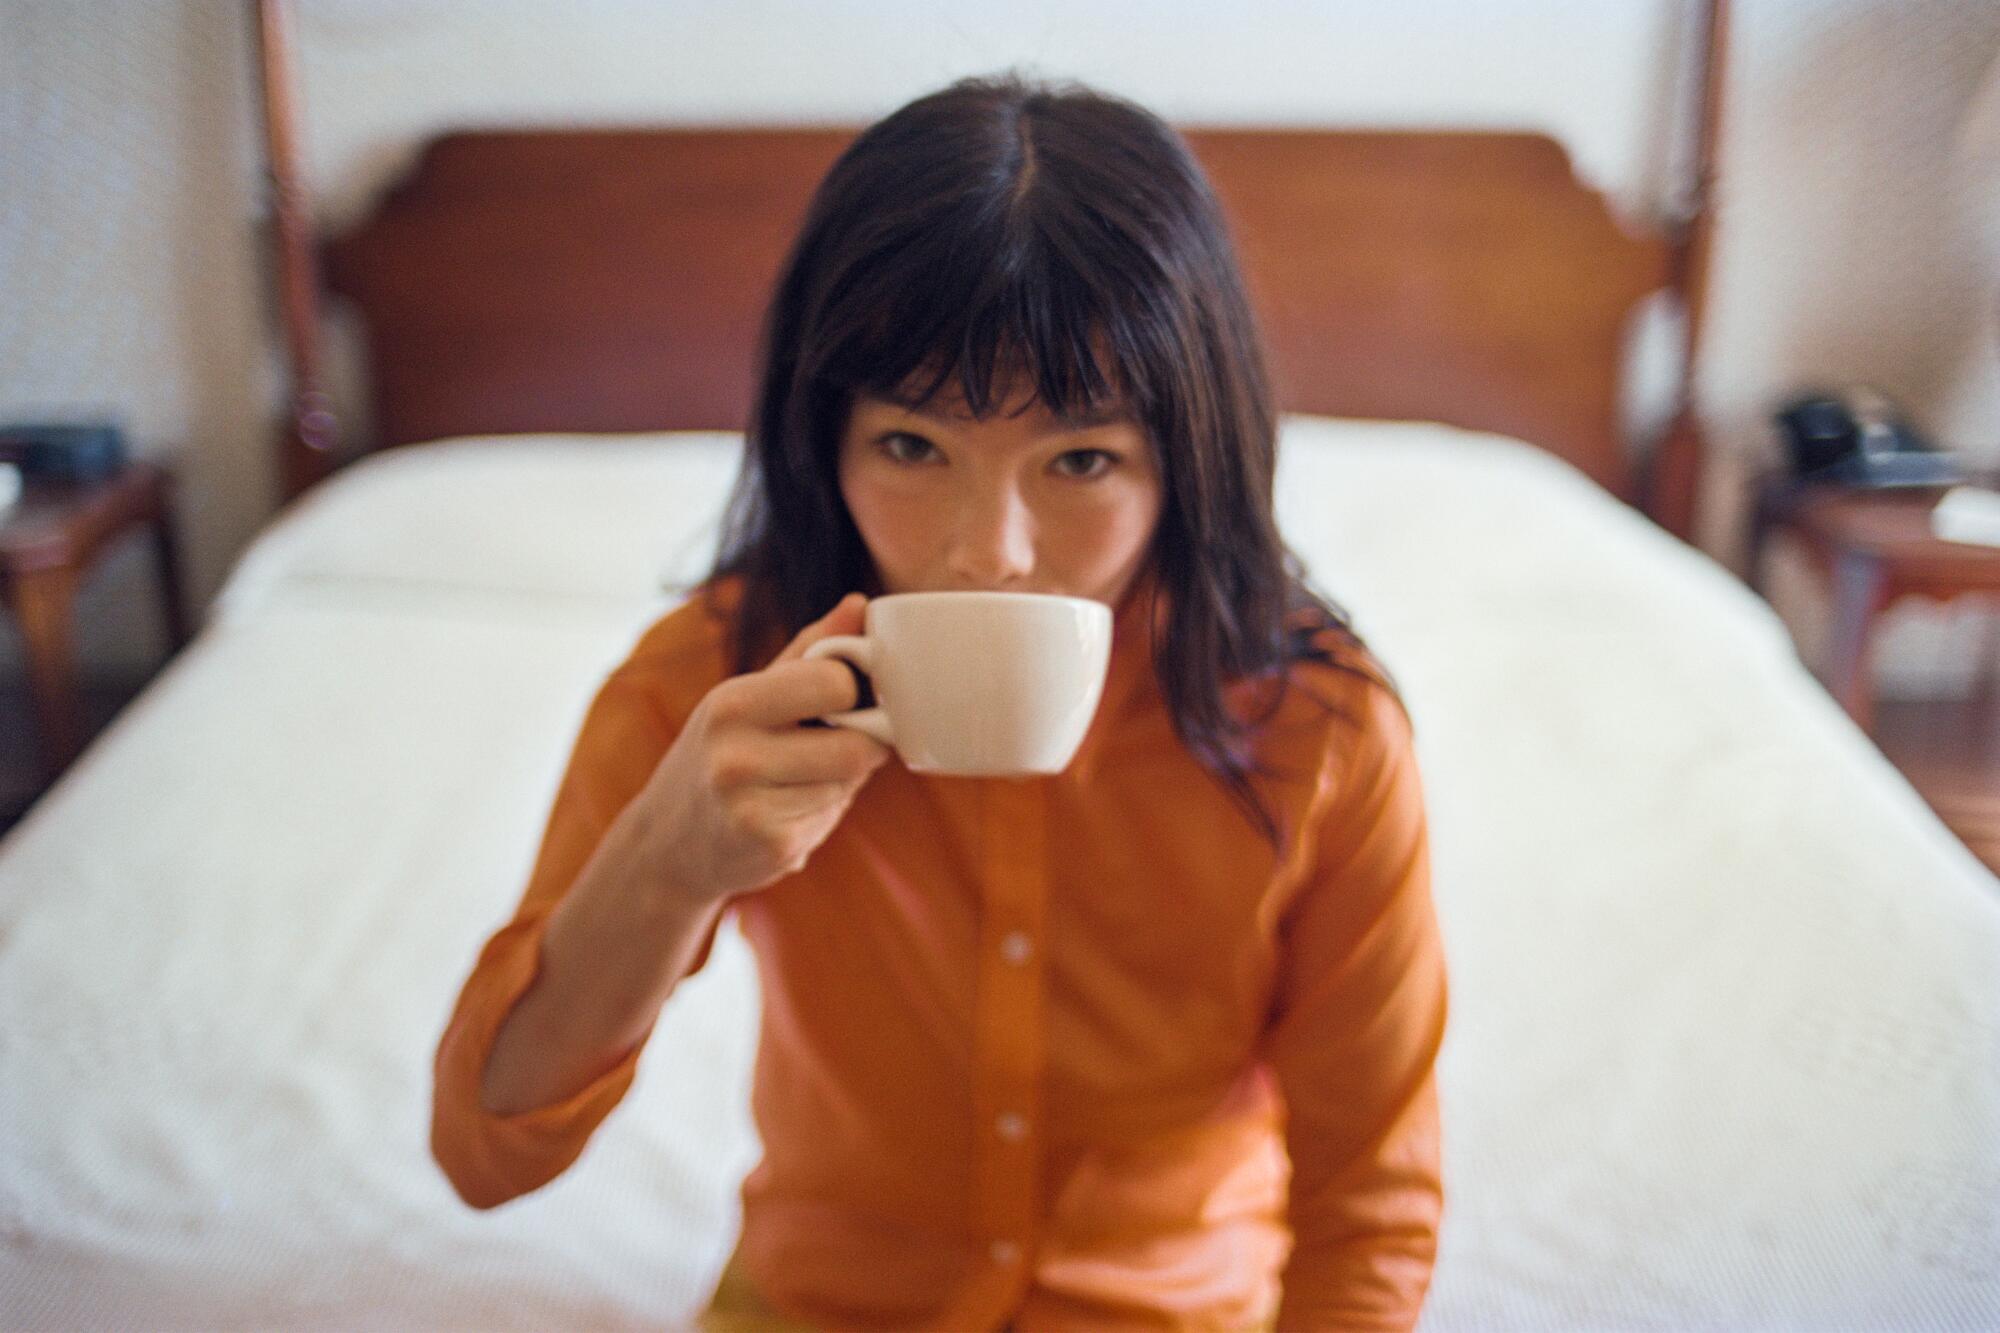 Björk sits on the edge of a bed, wearing an orange sweater and drinking from a white coffee cup.